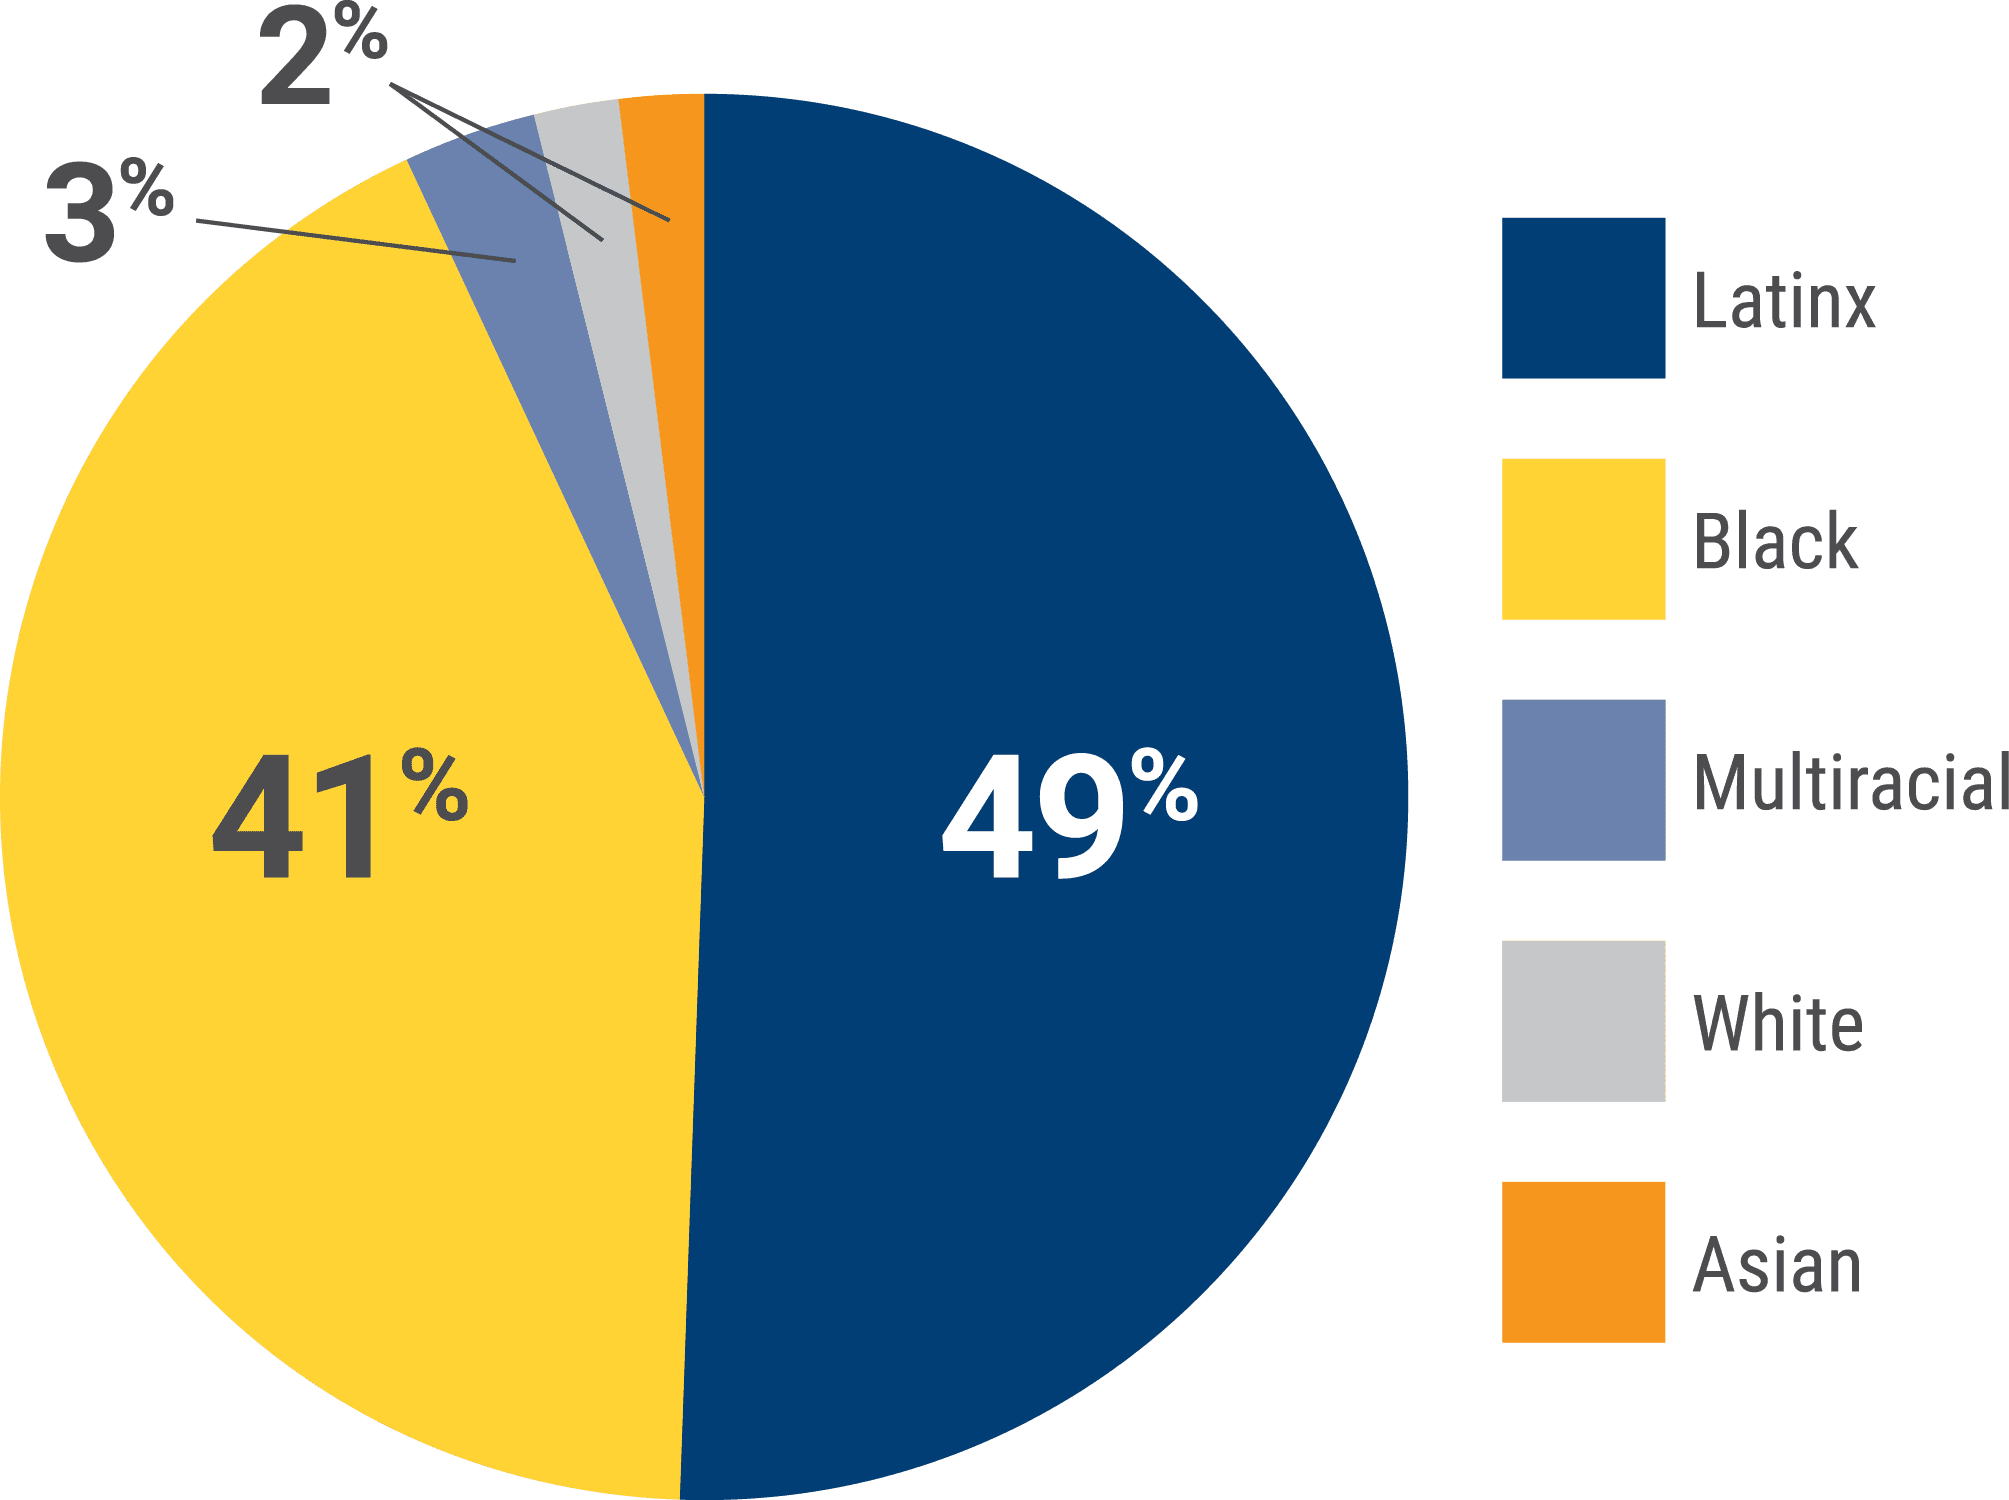 Pie chart shows percentages of respondents based on their race/ethnicity: 49% Latinx, 41% Black, 3% Multiracial, 2% White and 2% Asian